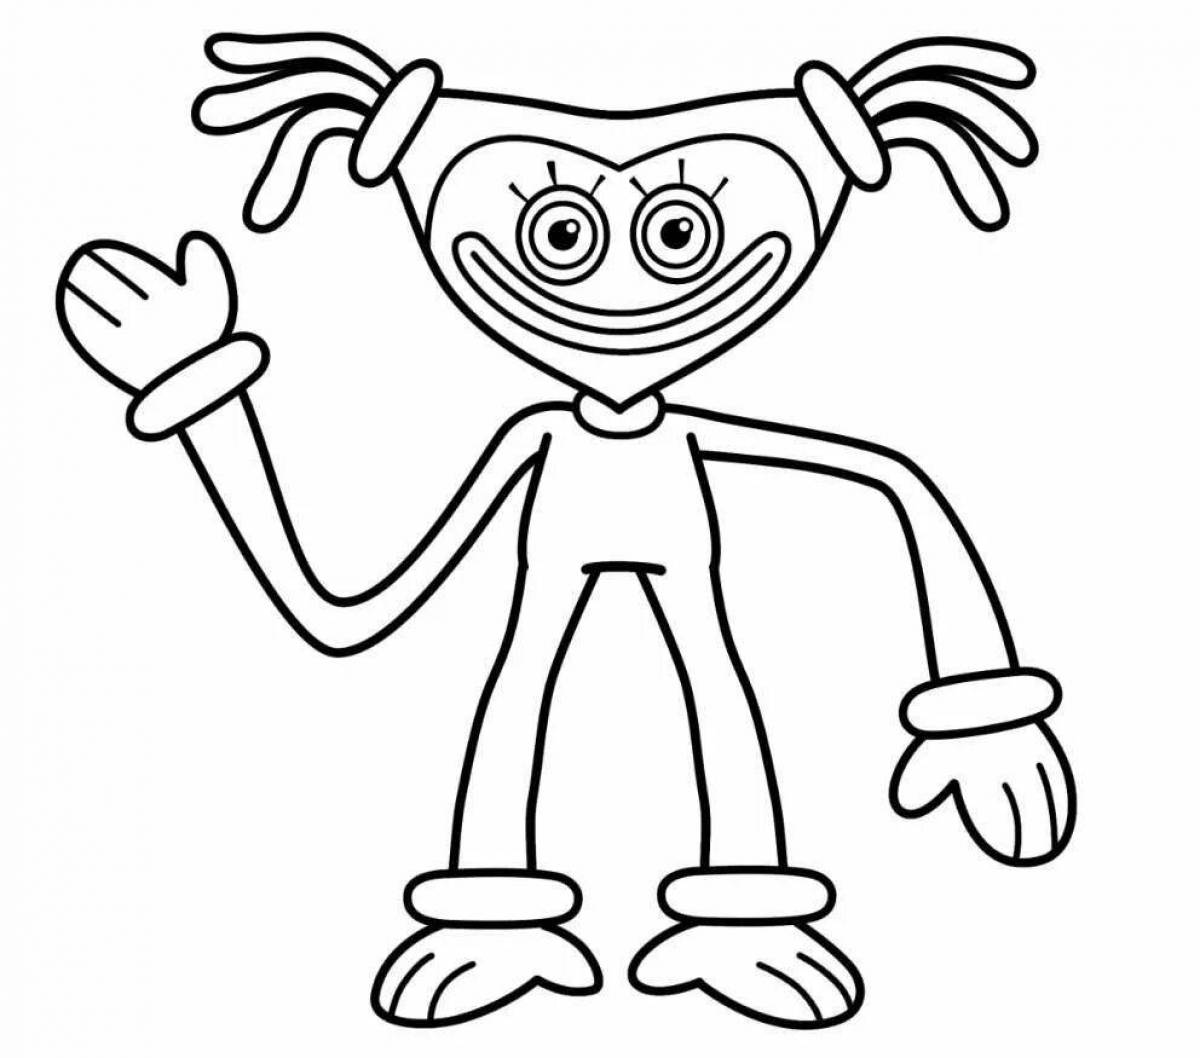 Coloring page adorable long legged daddy